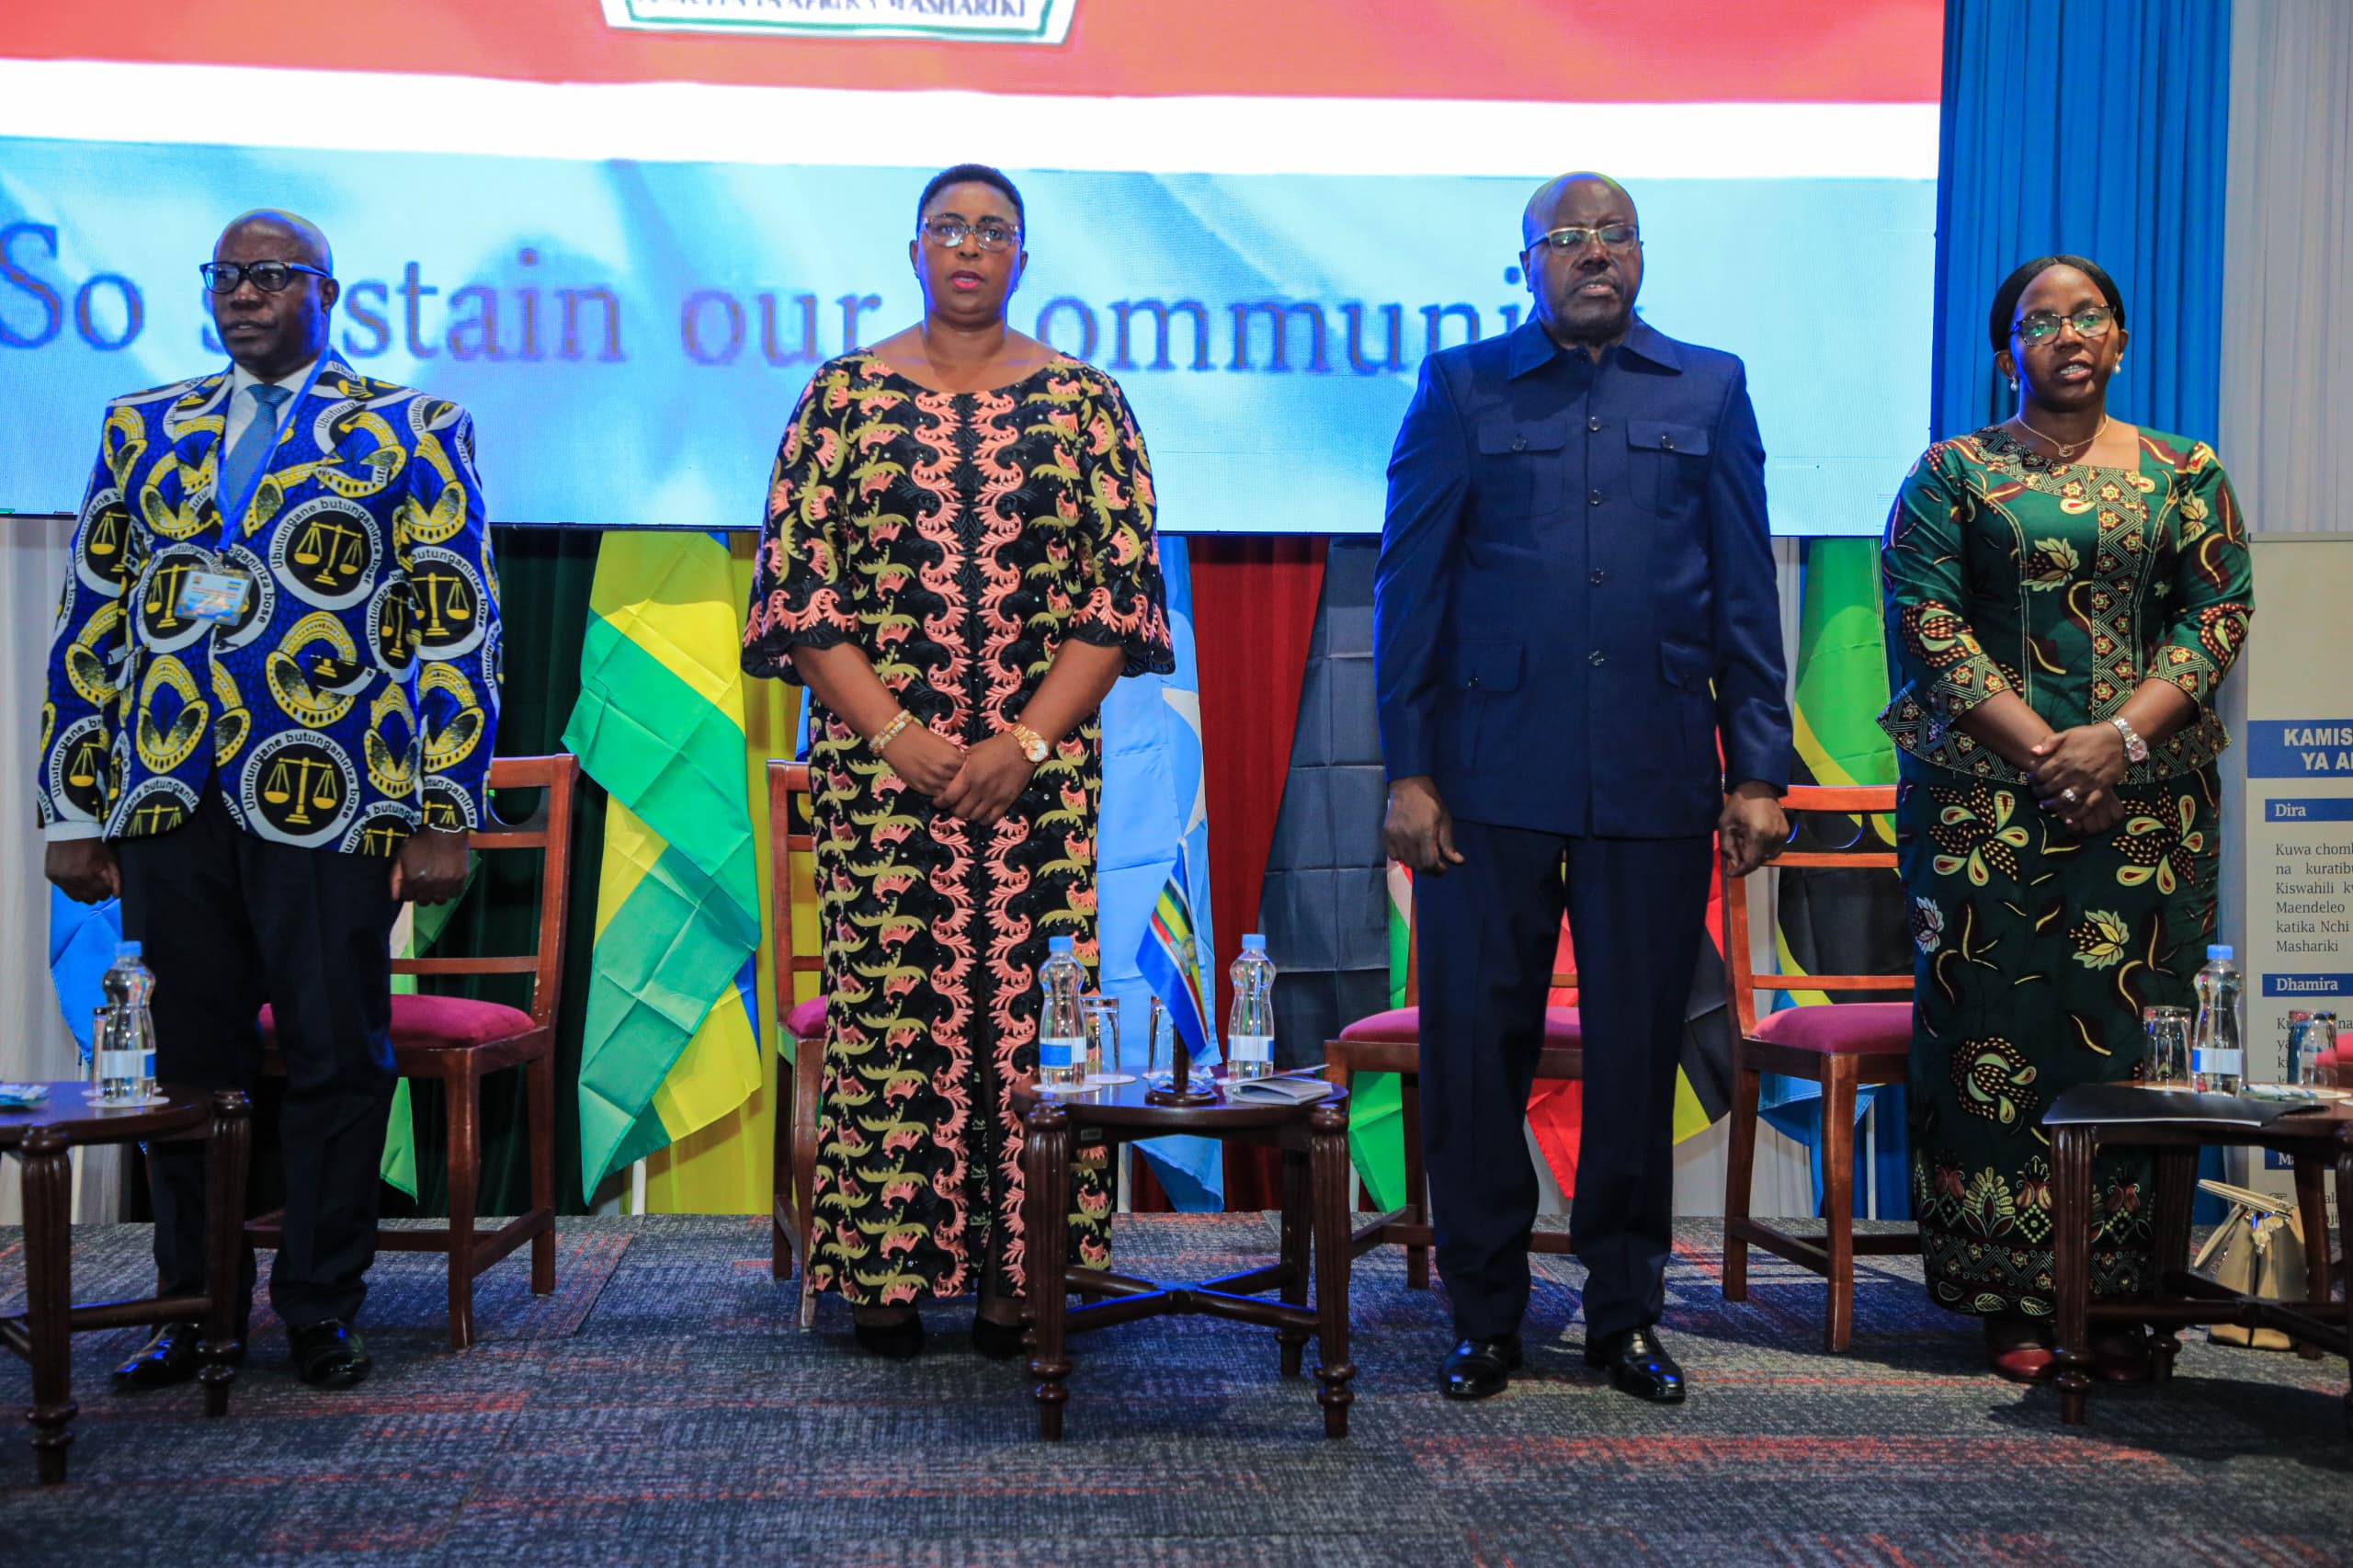  (L-R) The Judge President of the East African Court of Justice, Justice Nestor Kayobera; Kenya’s Gender, Culture, the Arts, and Heritage Cabinet Secretary, Hon. Aisha Jumwa; the Speaker of the East African Legislative Assembly, Rt. Hon. Joseph Ntakirutimana; and the East African Kiswahili Commission Executive Secretary, Dr. Caroline Asiimwe during 2nd East African Kiswahili Commission International Conference in Mombasa, Kenya.